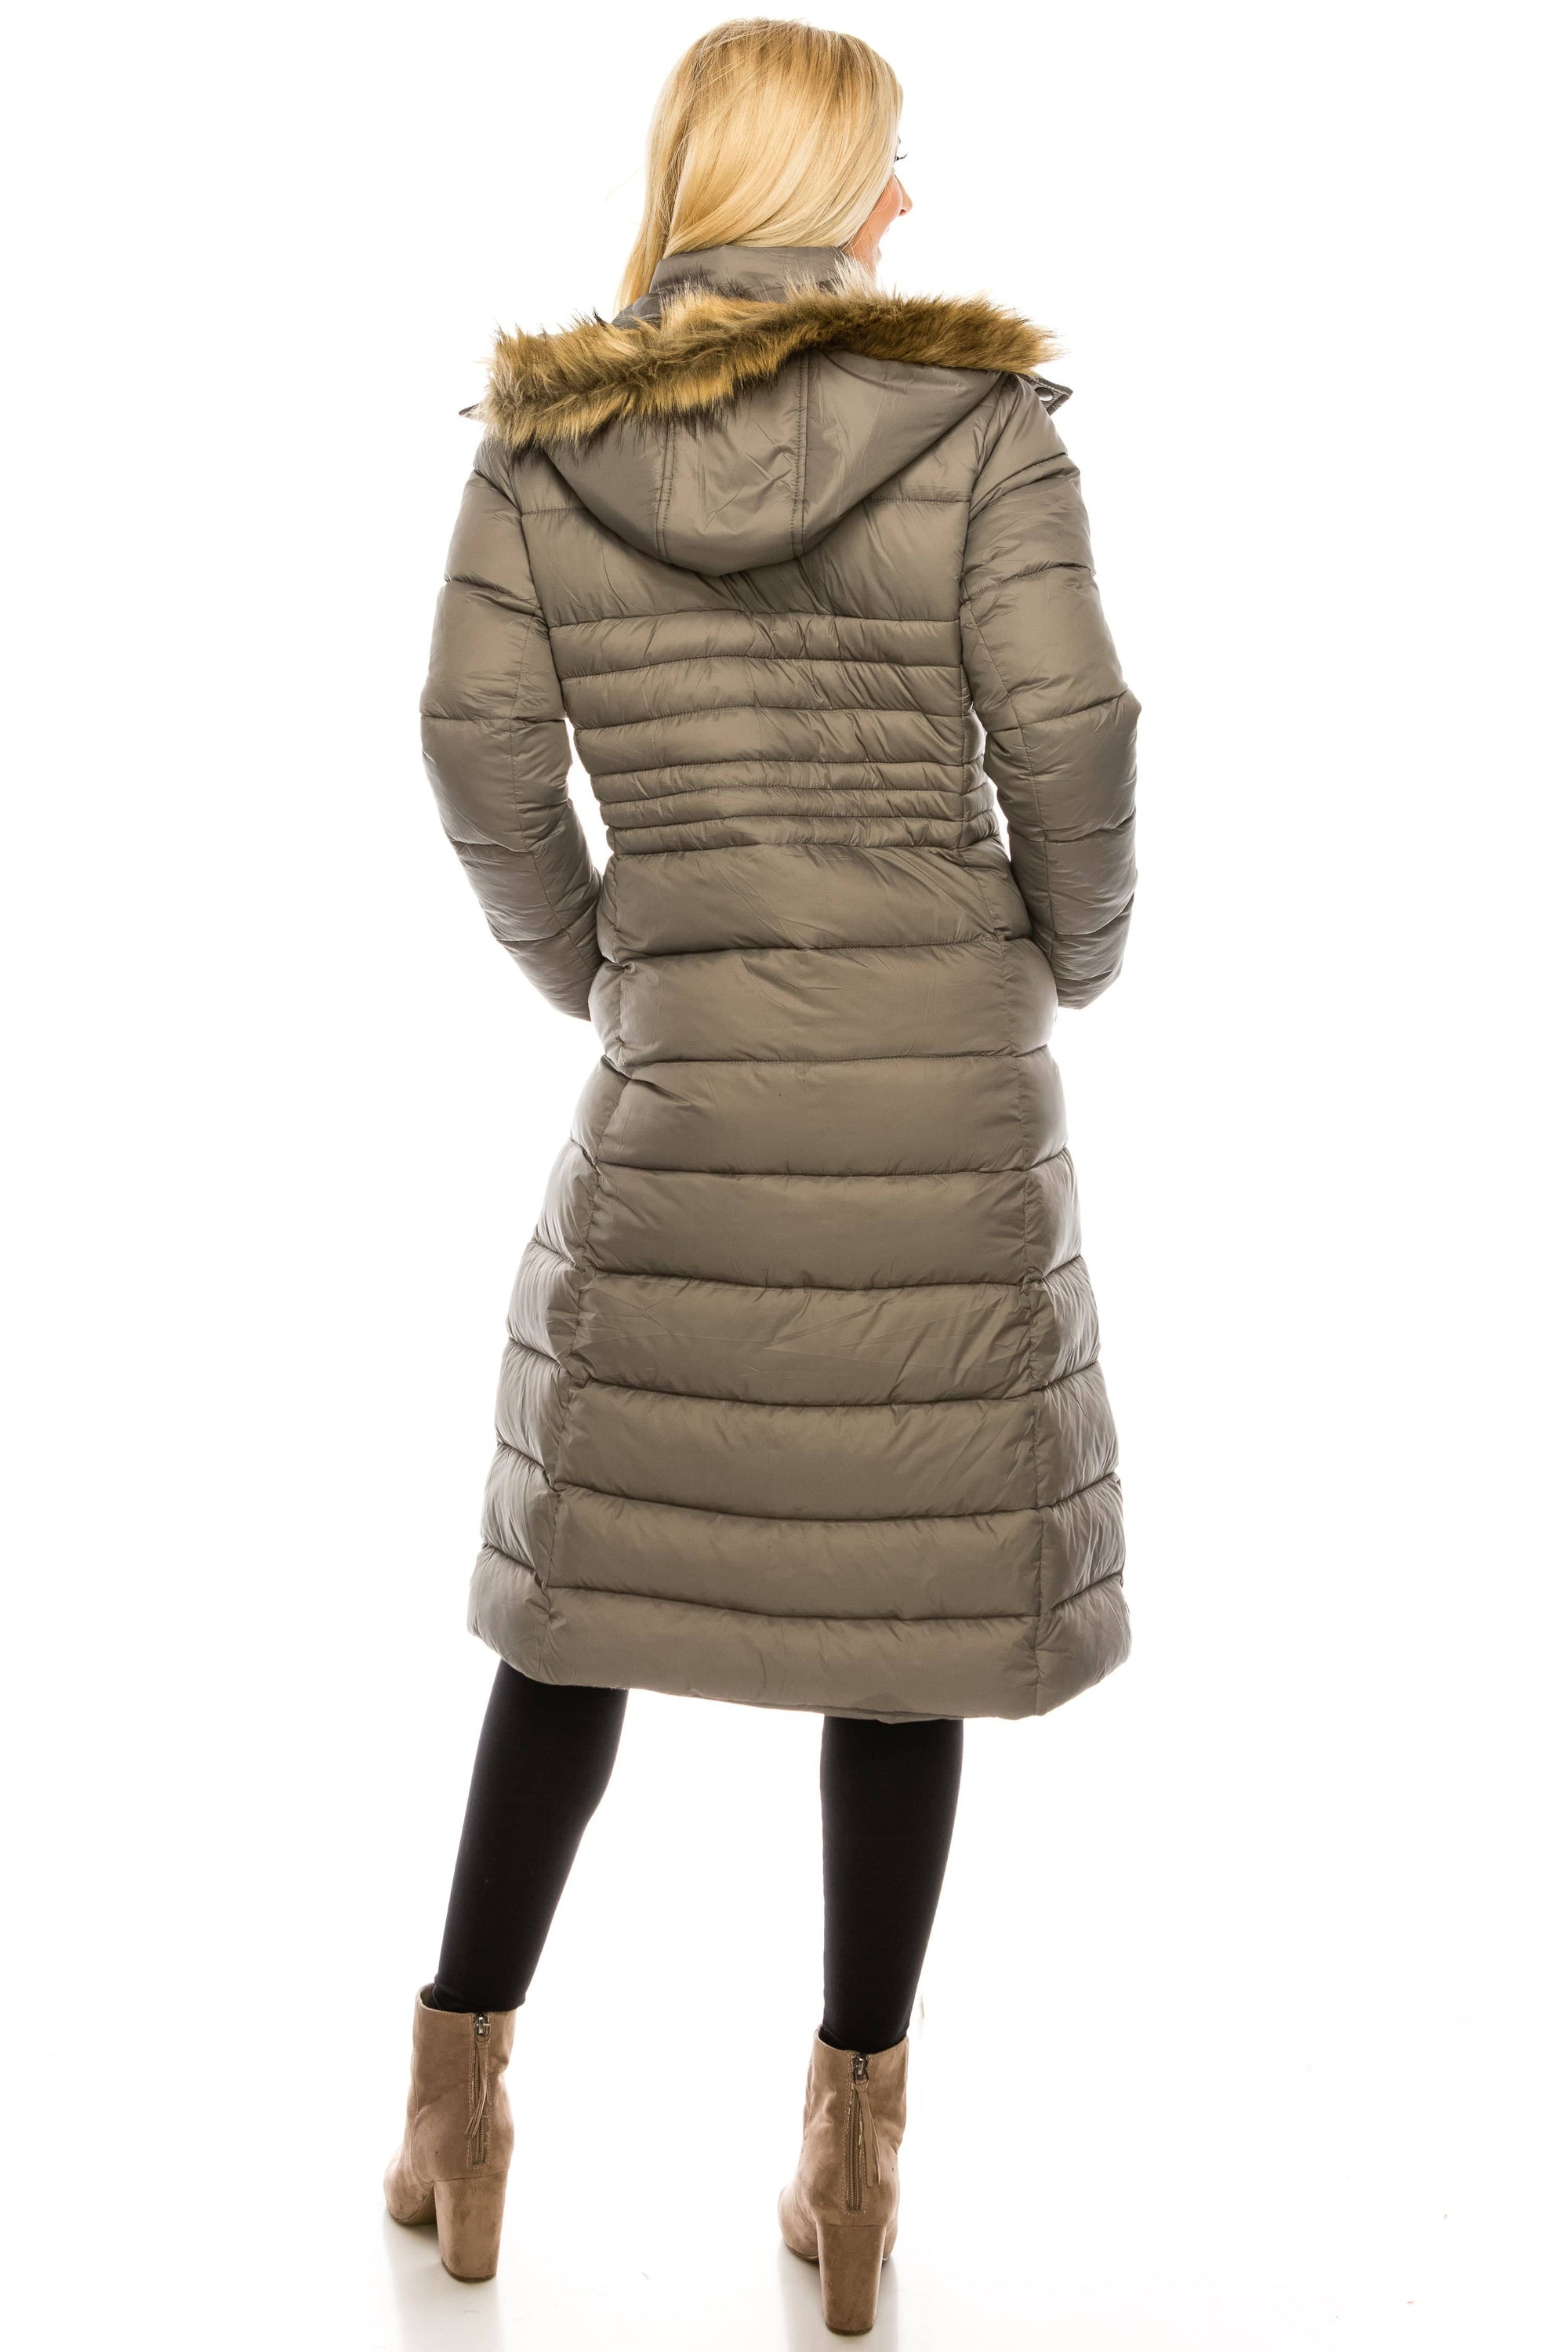 Haute Edition Women's Mid-Length Puffer Parka Coat with Faux Fur-lined